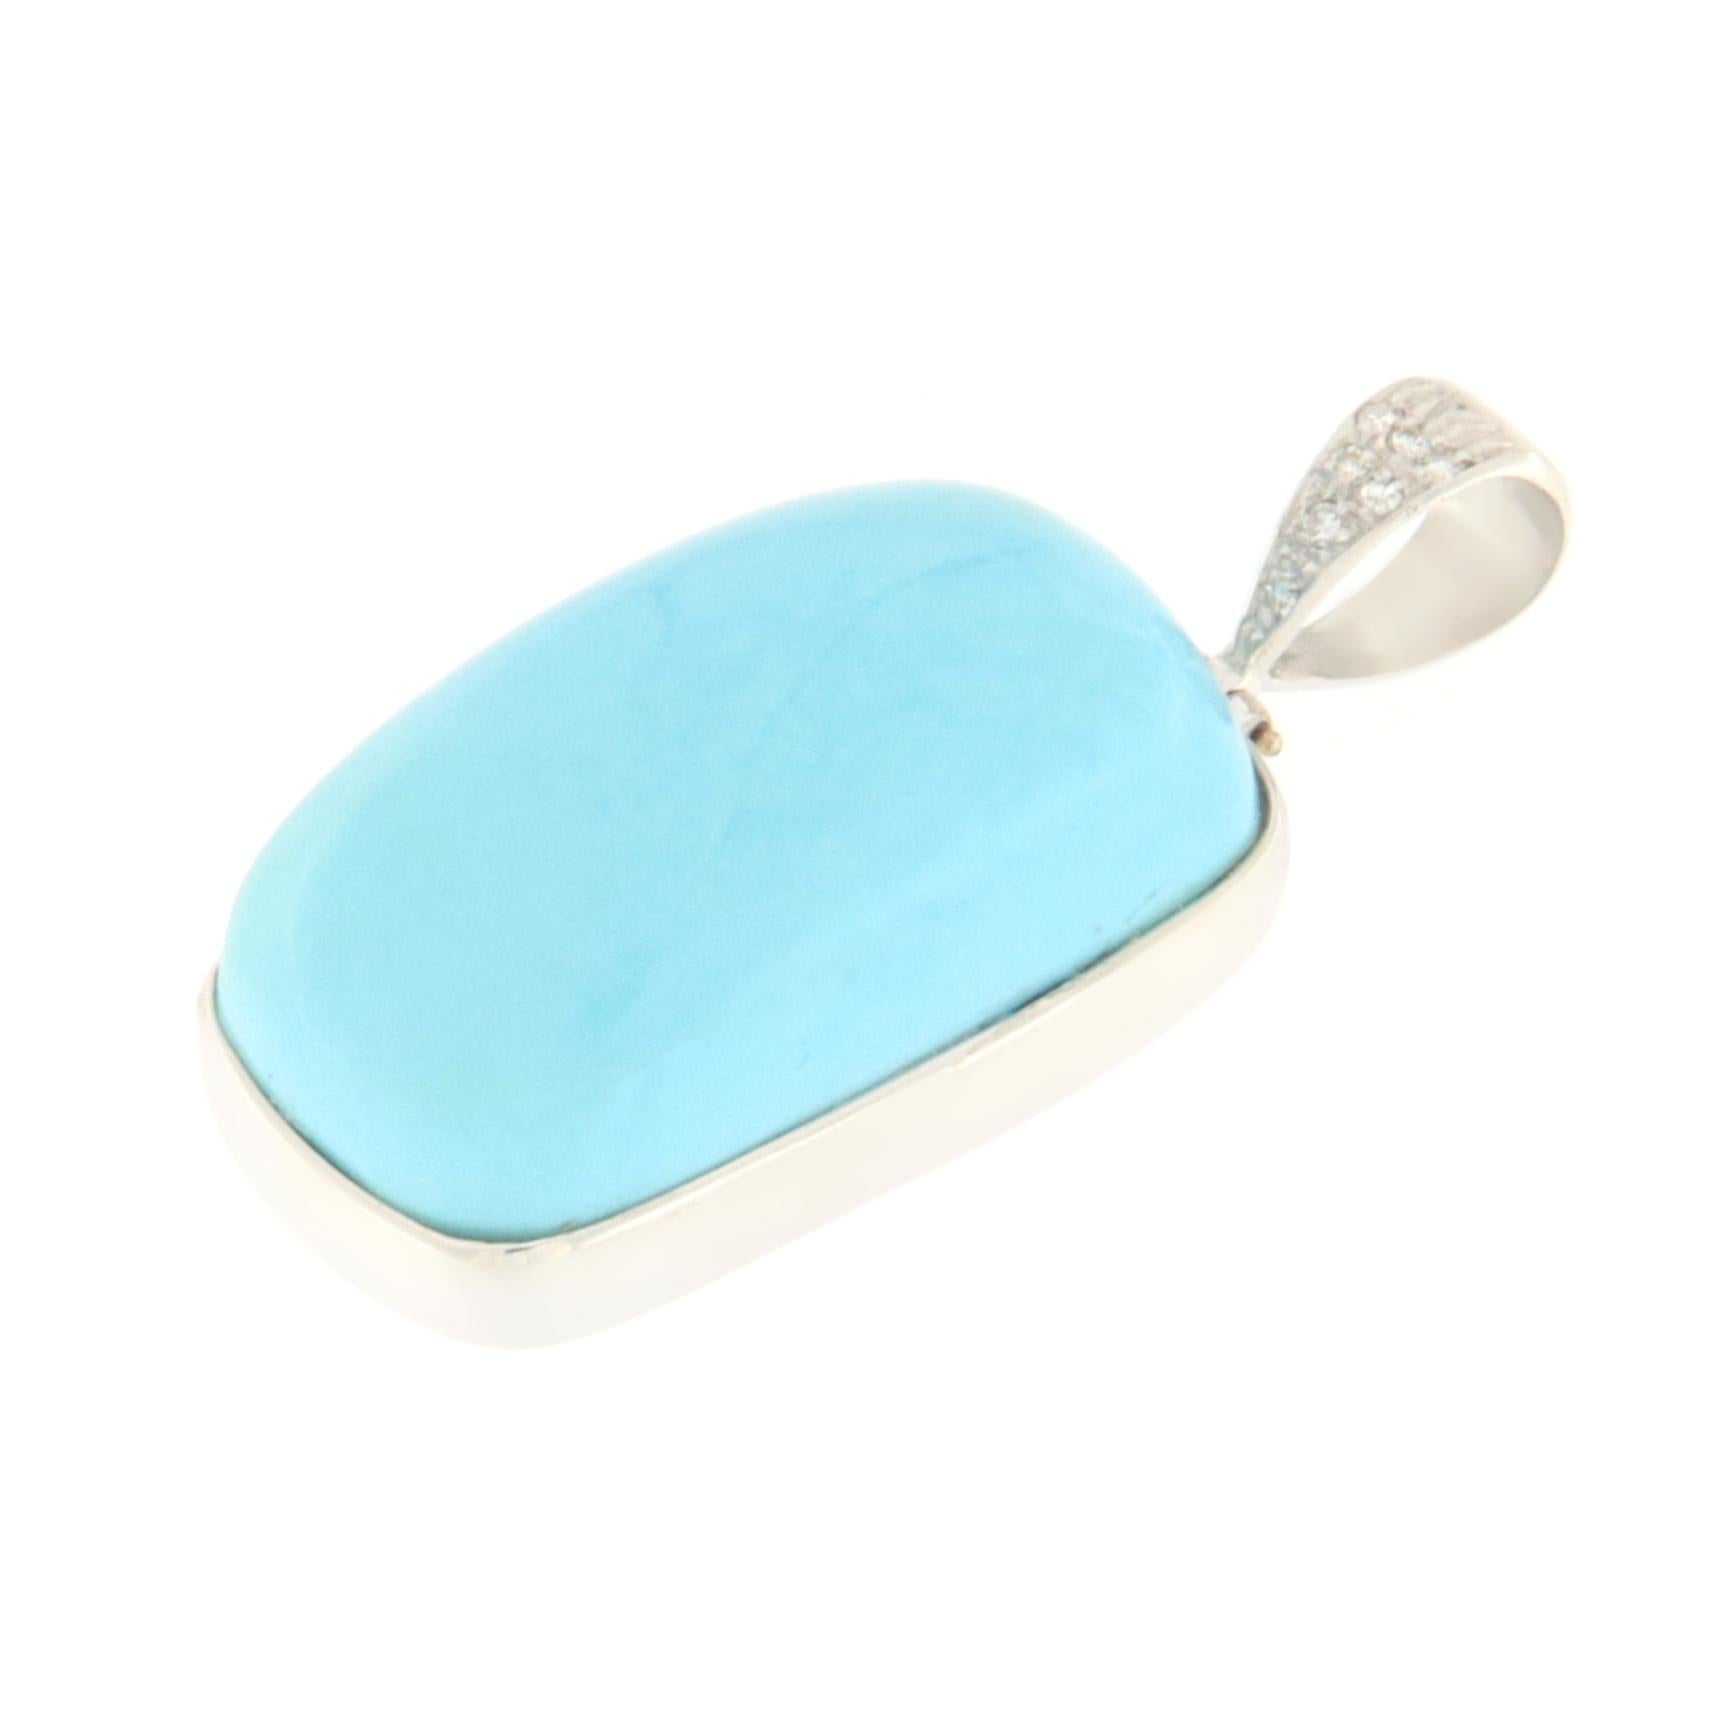 This pendant, crafted in fine 18-karat white gold, is a true statement of style and sophistication. At the heart of this exquisite creation lies a natural turquoise, selected for its vibrant blue hue that captures the essence of the sky and sea.